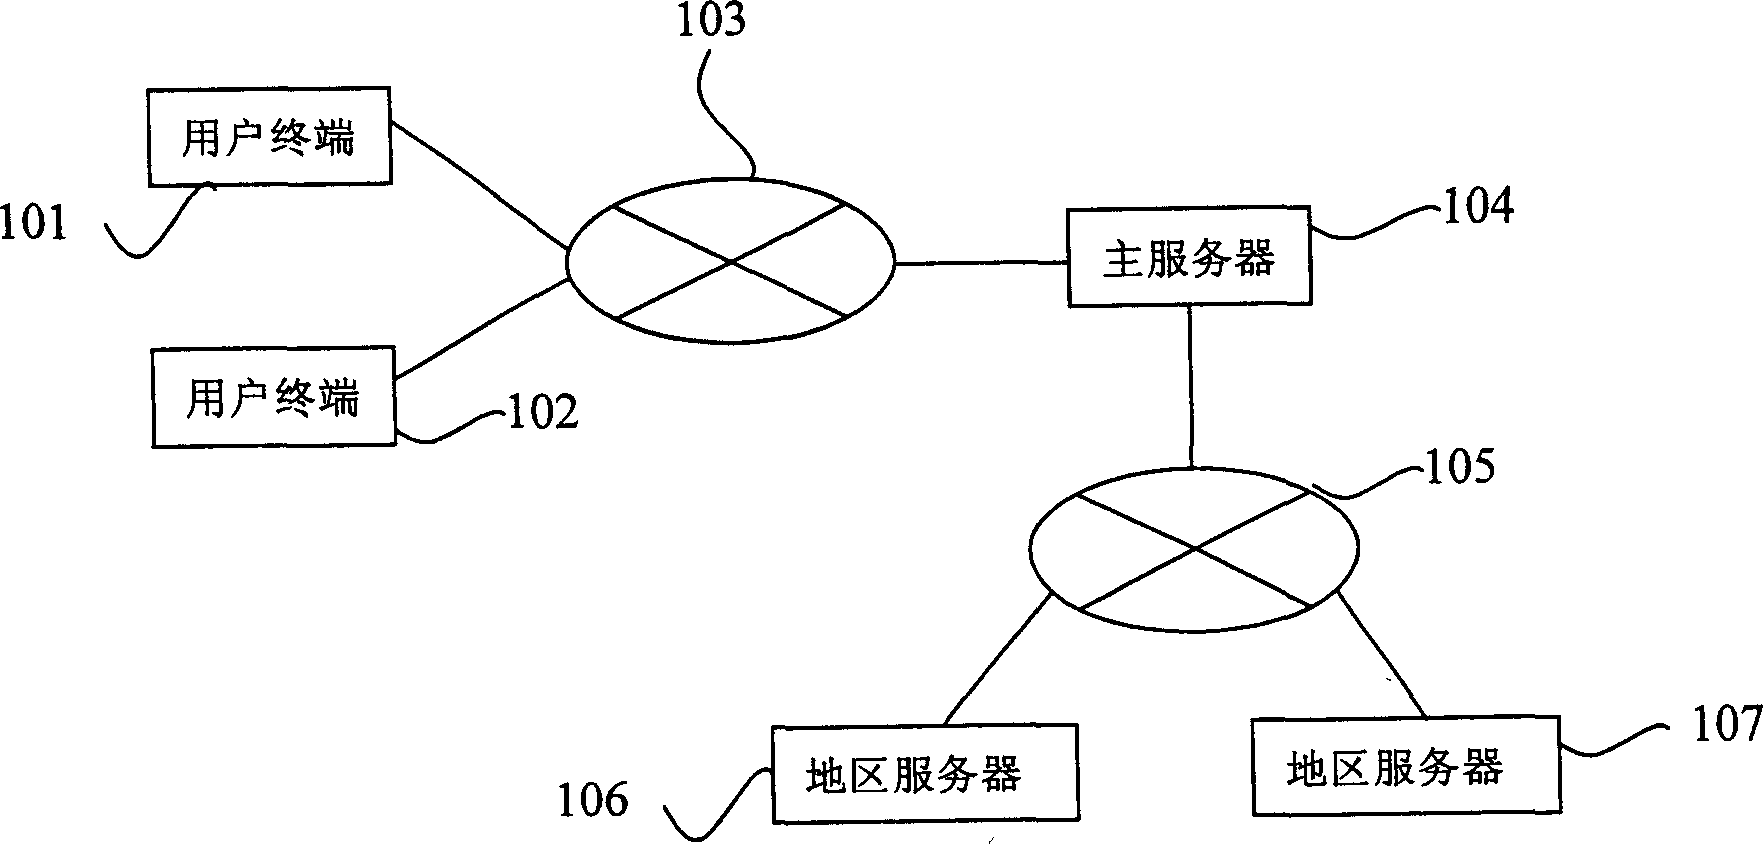 Over network paying system and method, and user interface providing system and method